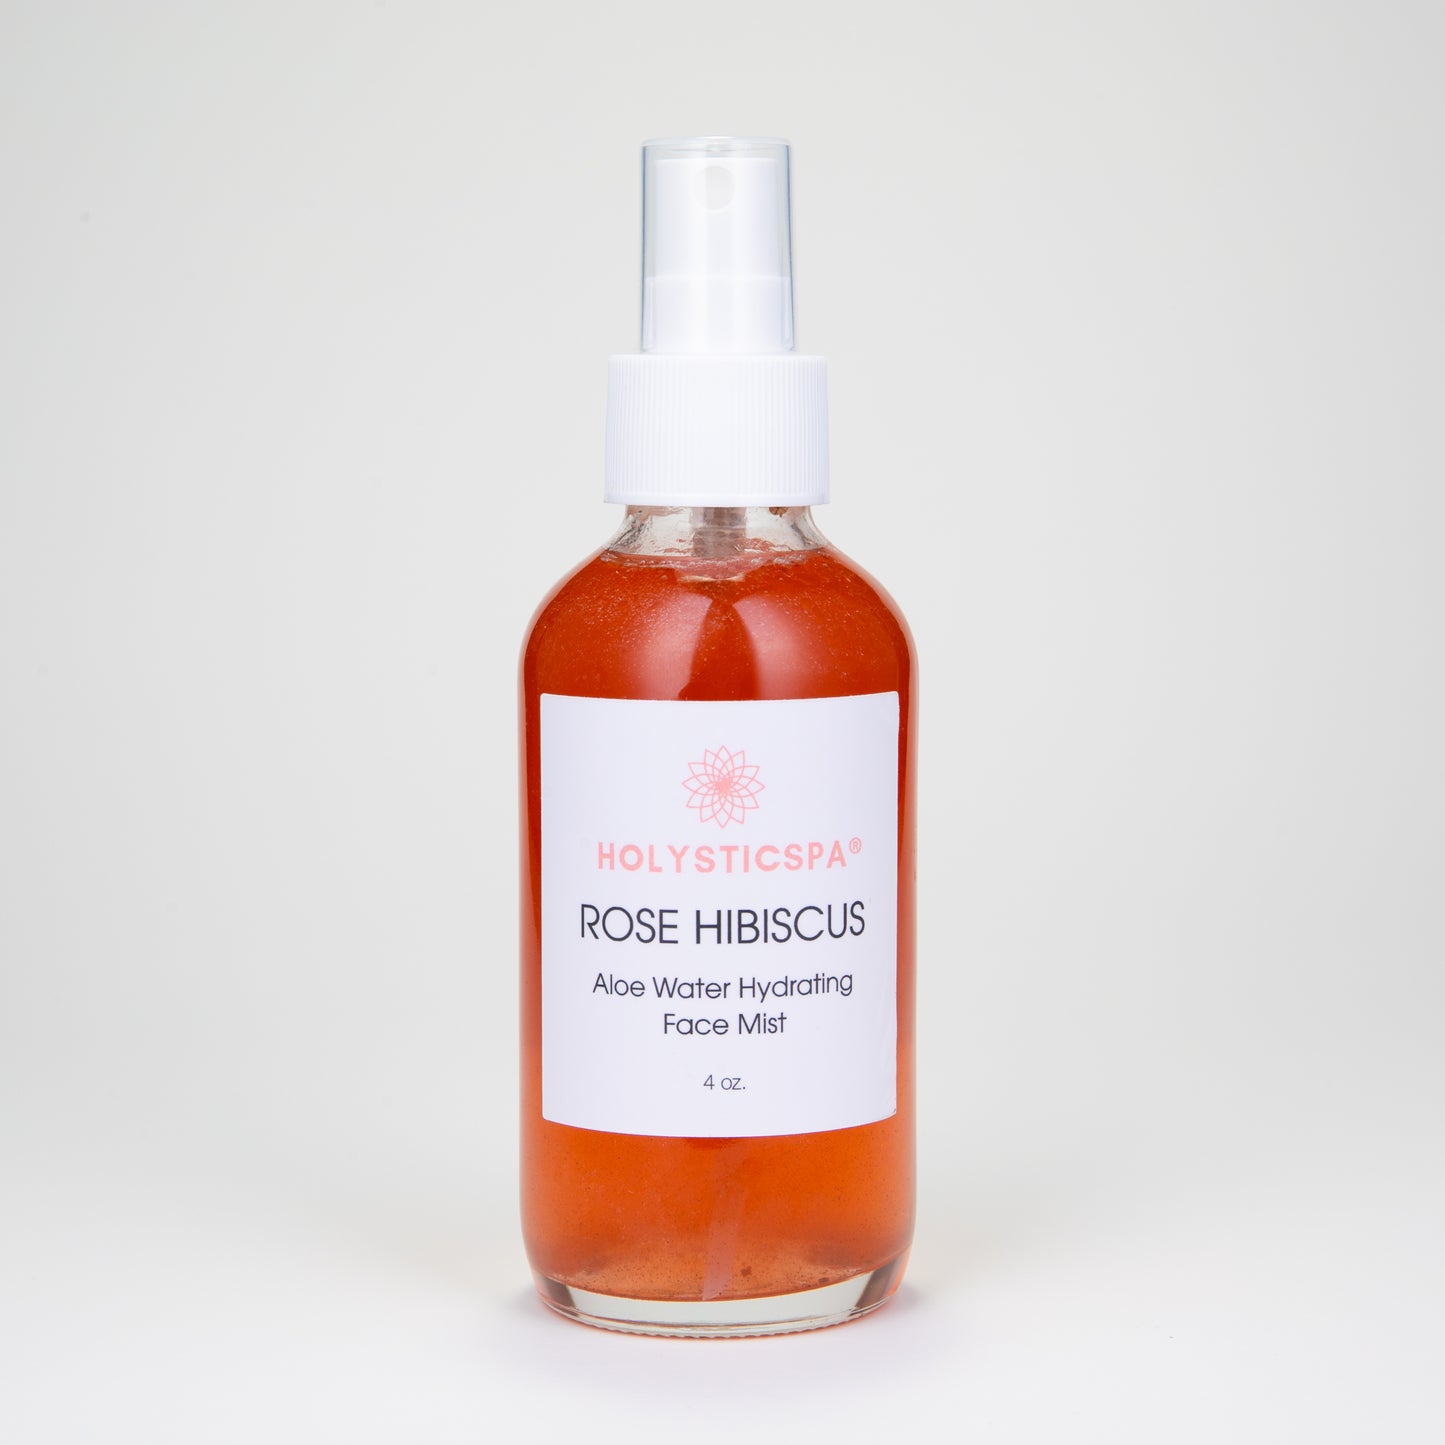 Rose Hibiscus Aloe Water Hydrating Face Mist